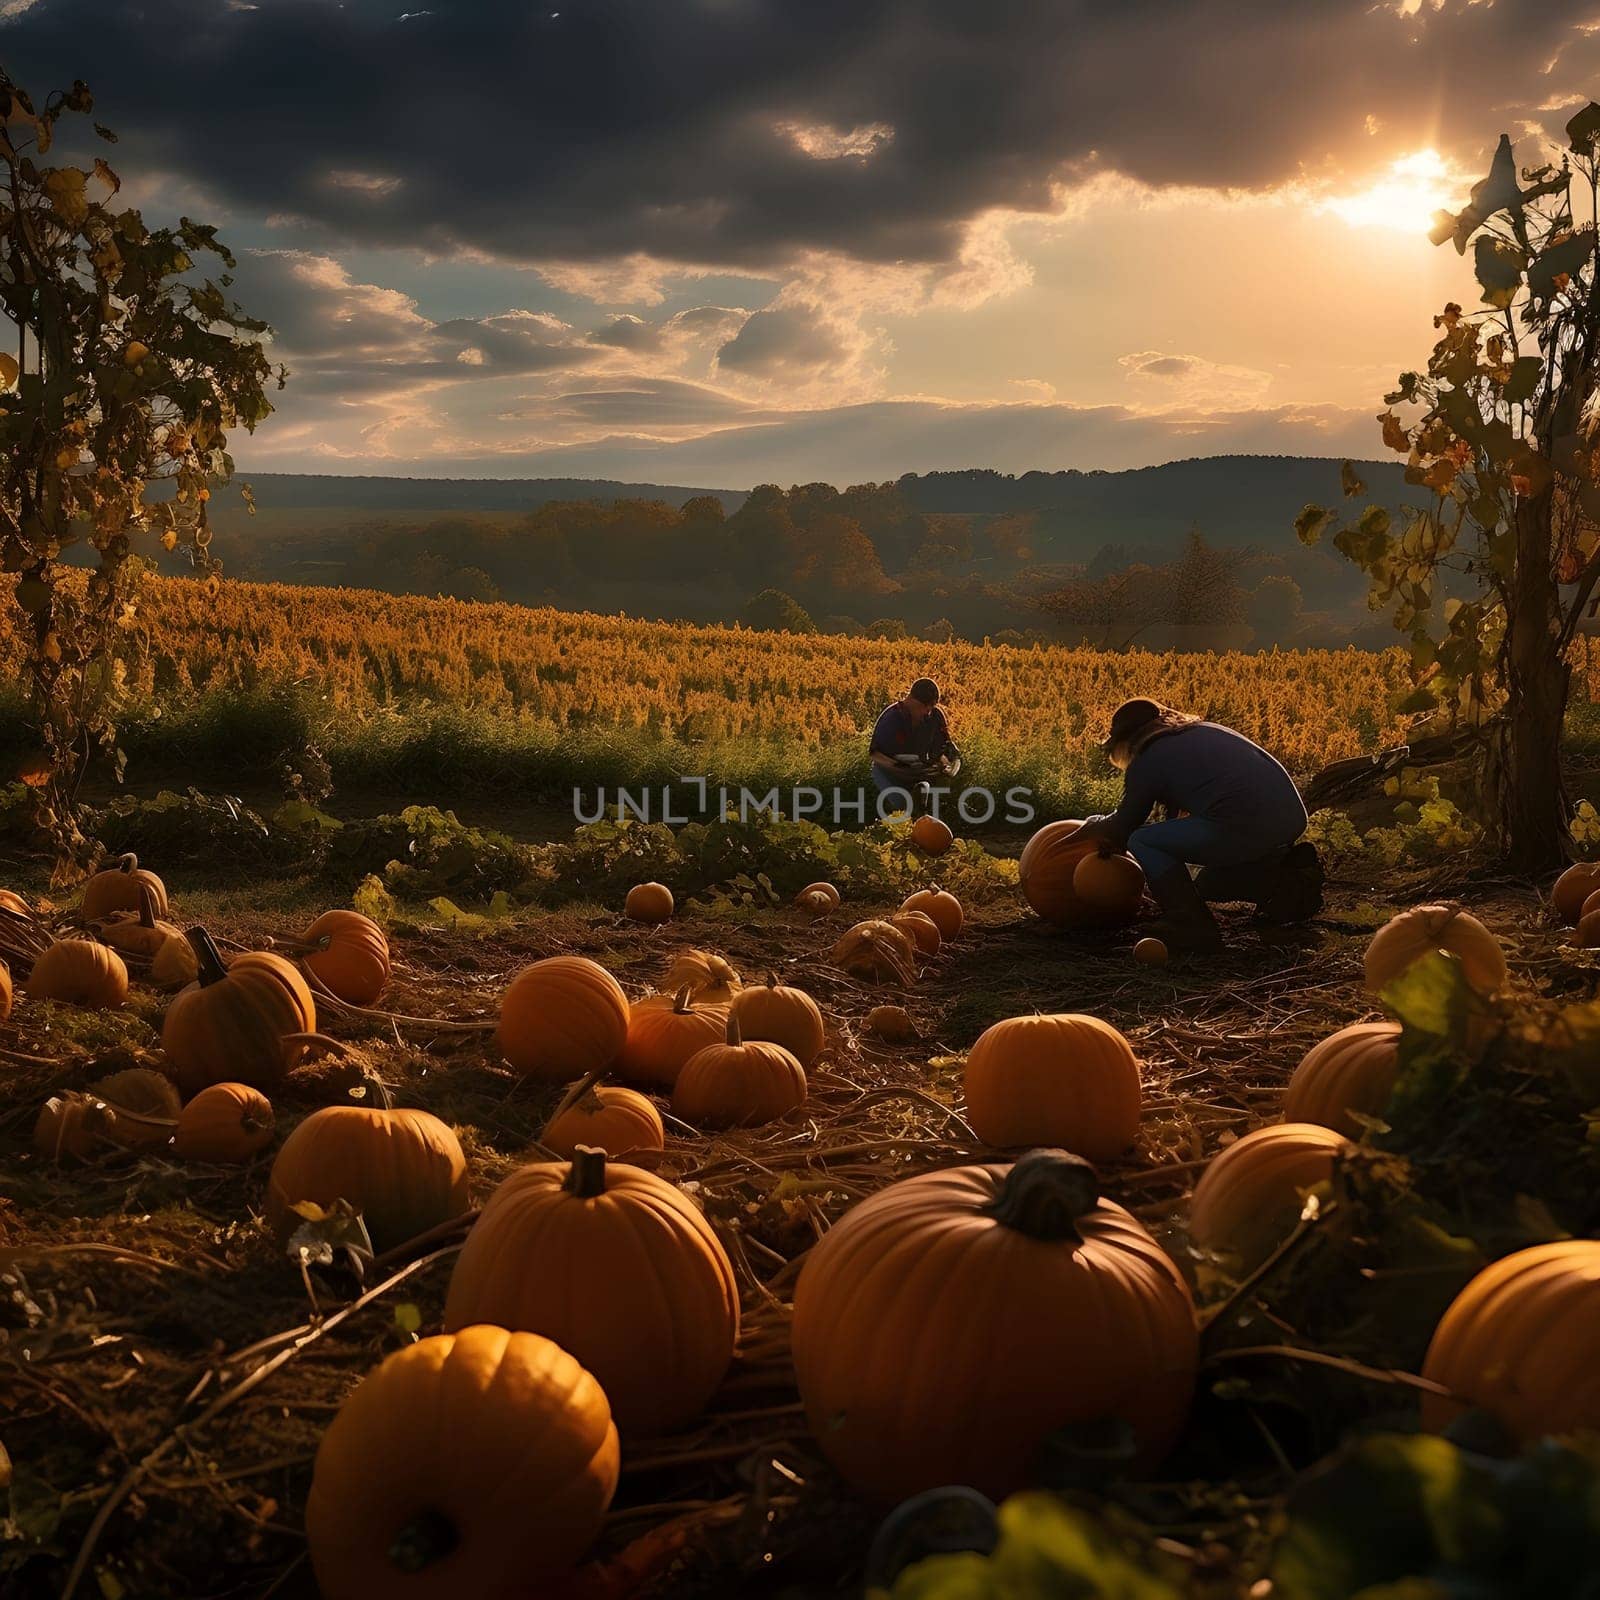 Two people in the south at sunset. Pumpkin as a dish of thanksgiving for the harvest. An atmosphere of joy and celebration.